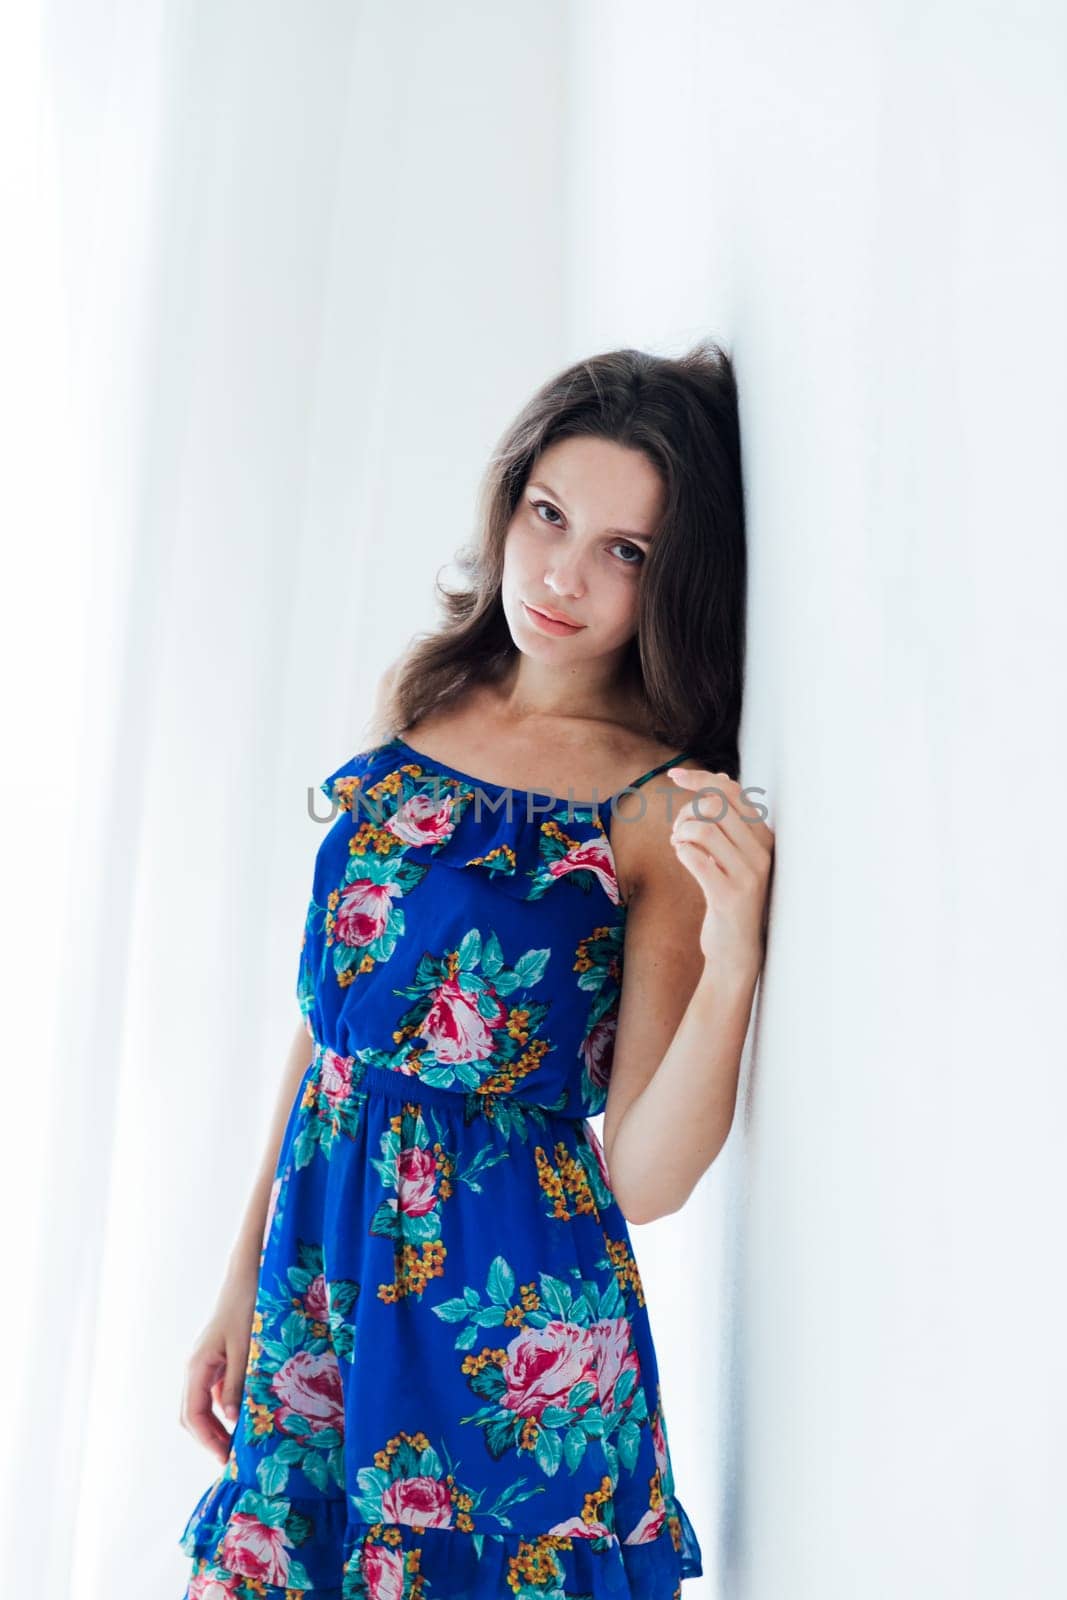 beautiful woman in blue floral dress on a white background